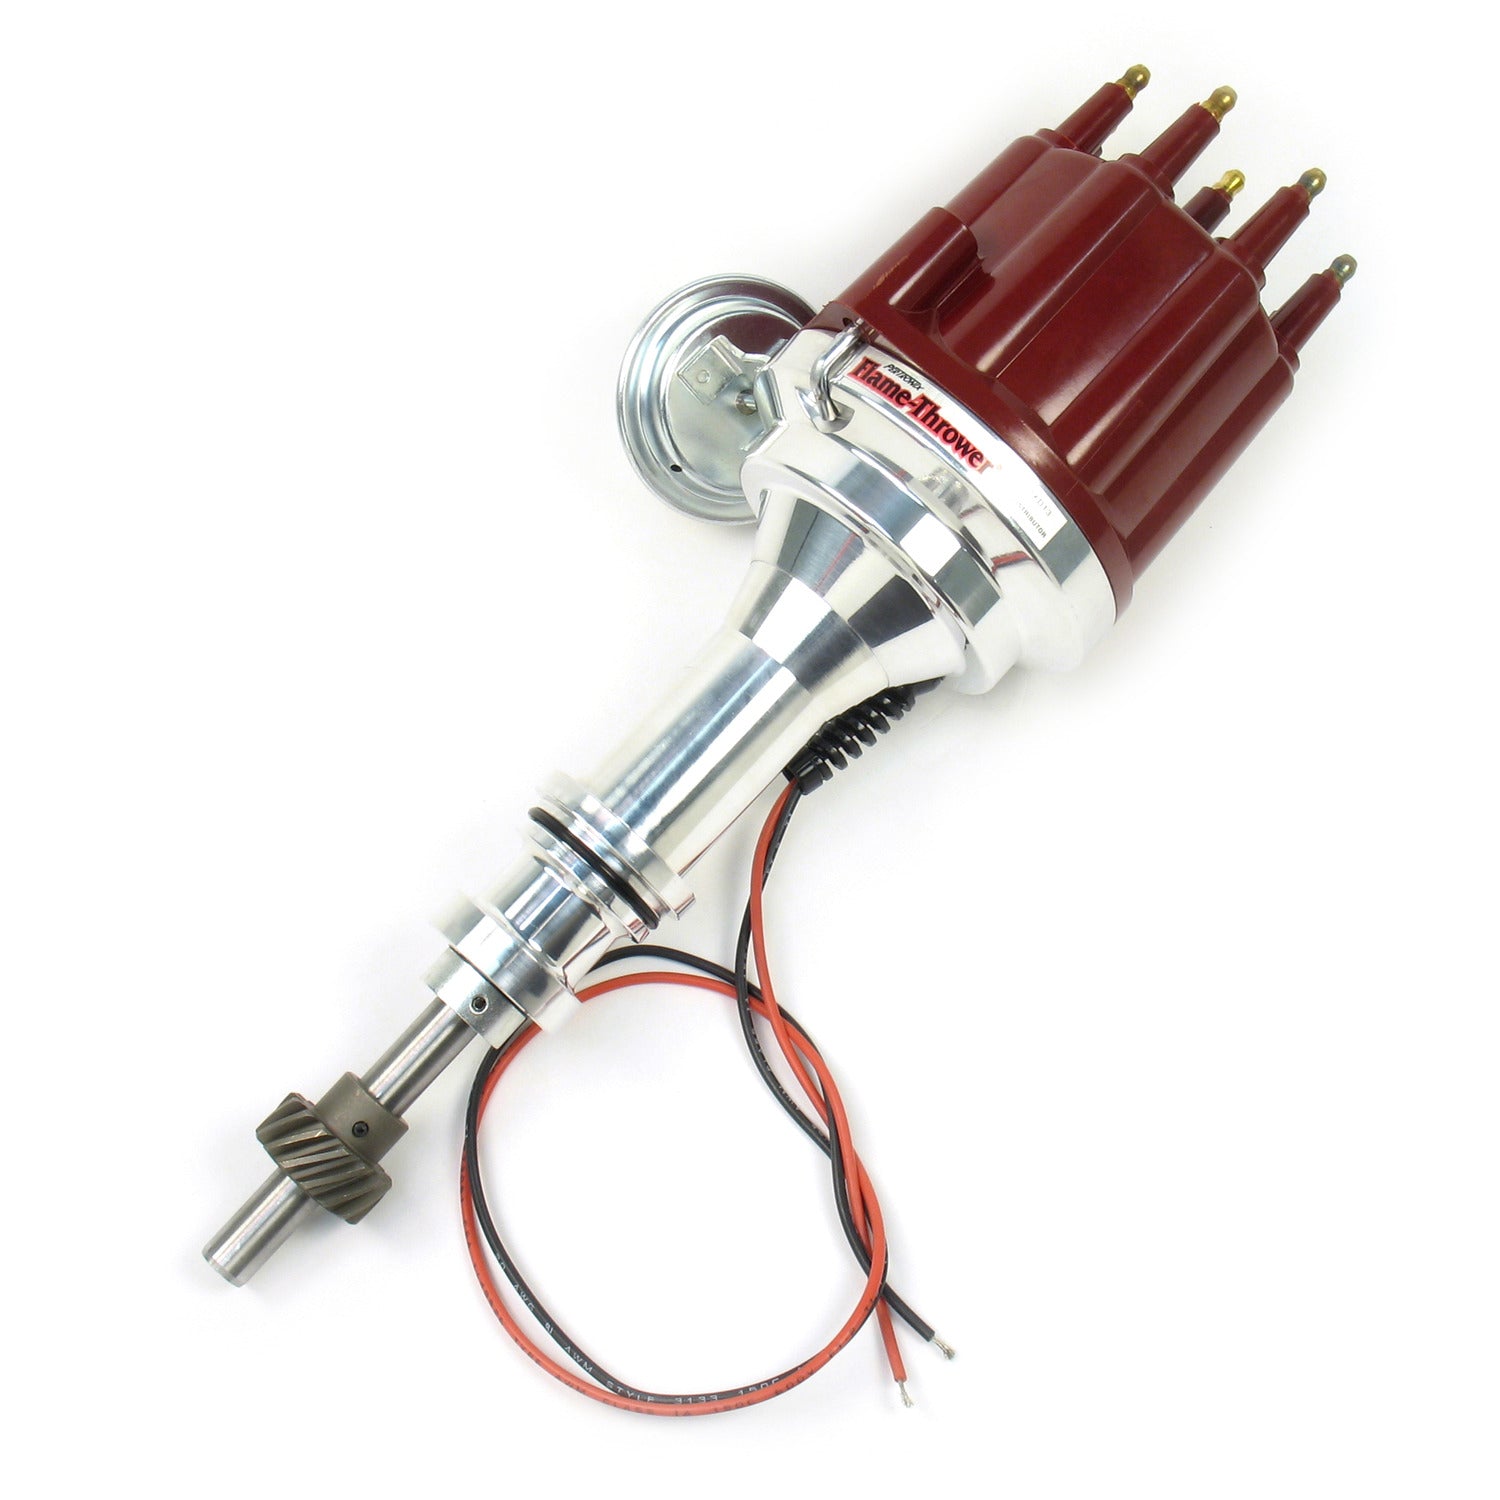 PerTronix D130711 Flame-Thrower Electronic Distributor Billet Ford Small Block Plug and Play with Ignitor II Technology Vacuum Advance Red Male Cap